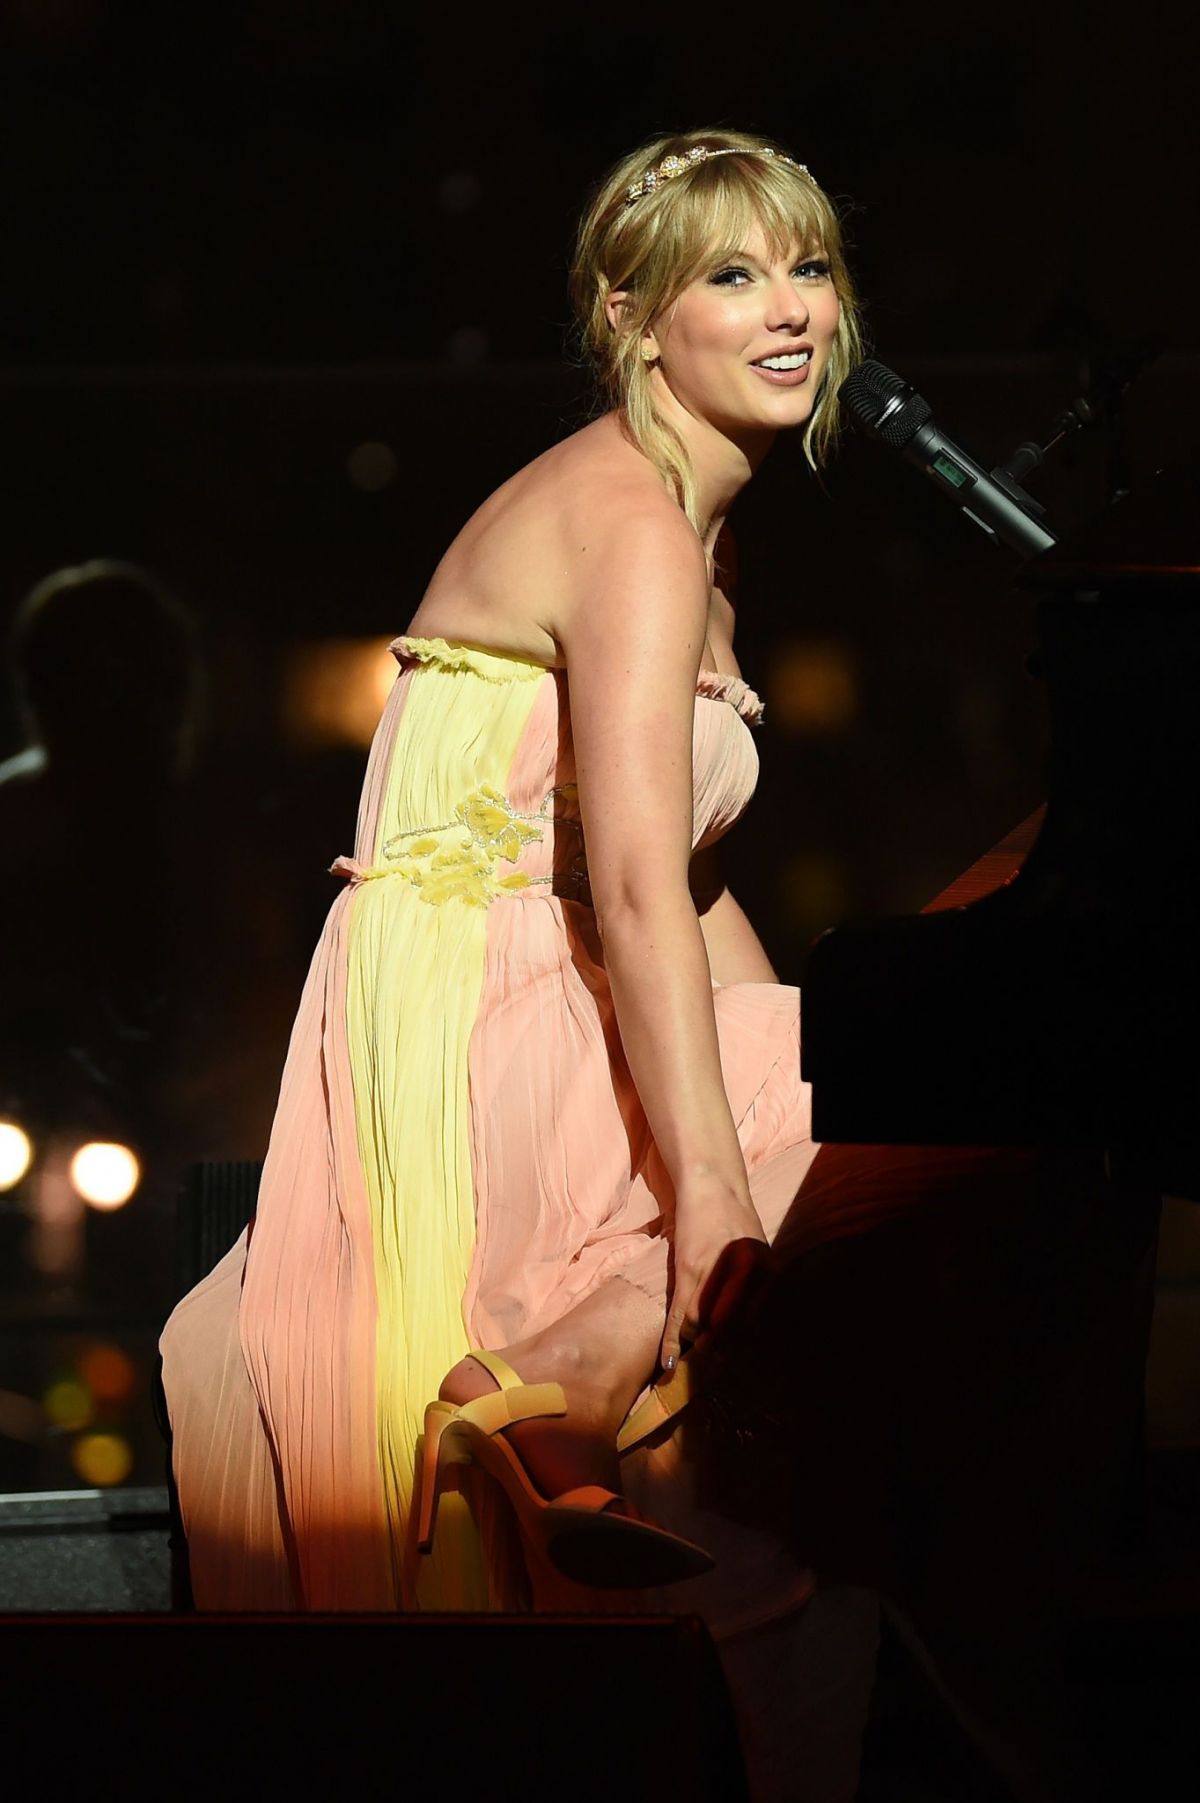 taylor-swift-performs-at-time-100-gala-at-jazz-lincoln-center-in-new-york-04-23-2019-4.jpg